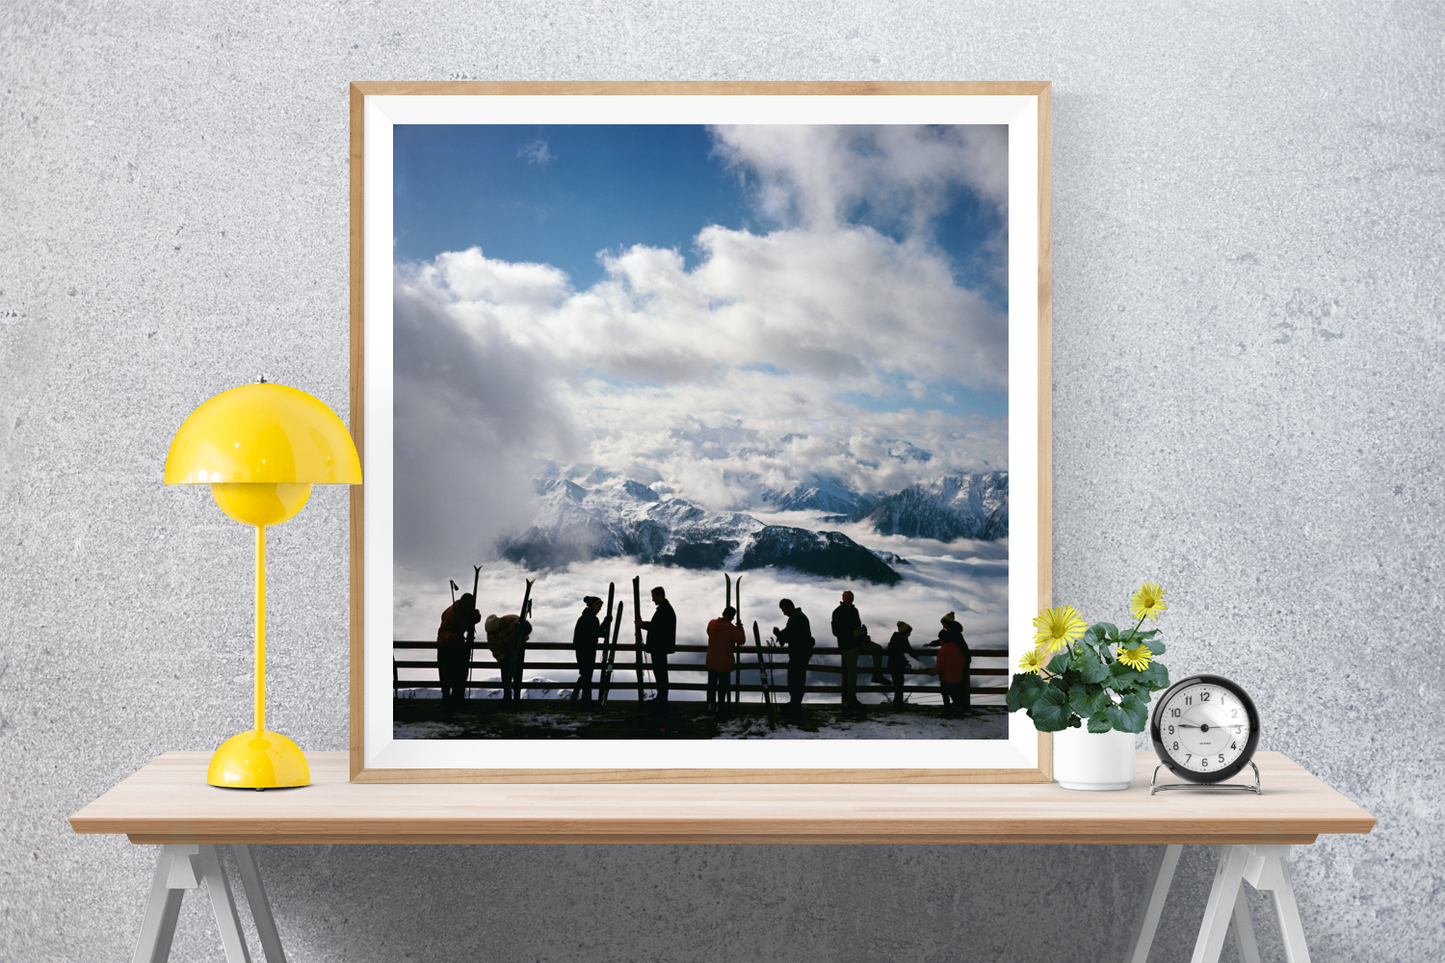 Framed Slim Aarons: Verbier View photo for sale Getty Images Gallery